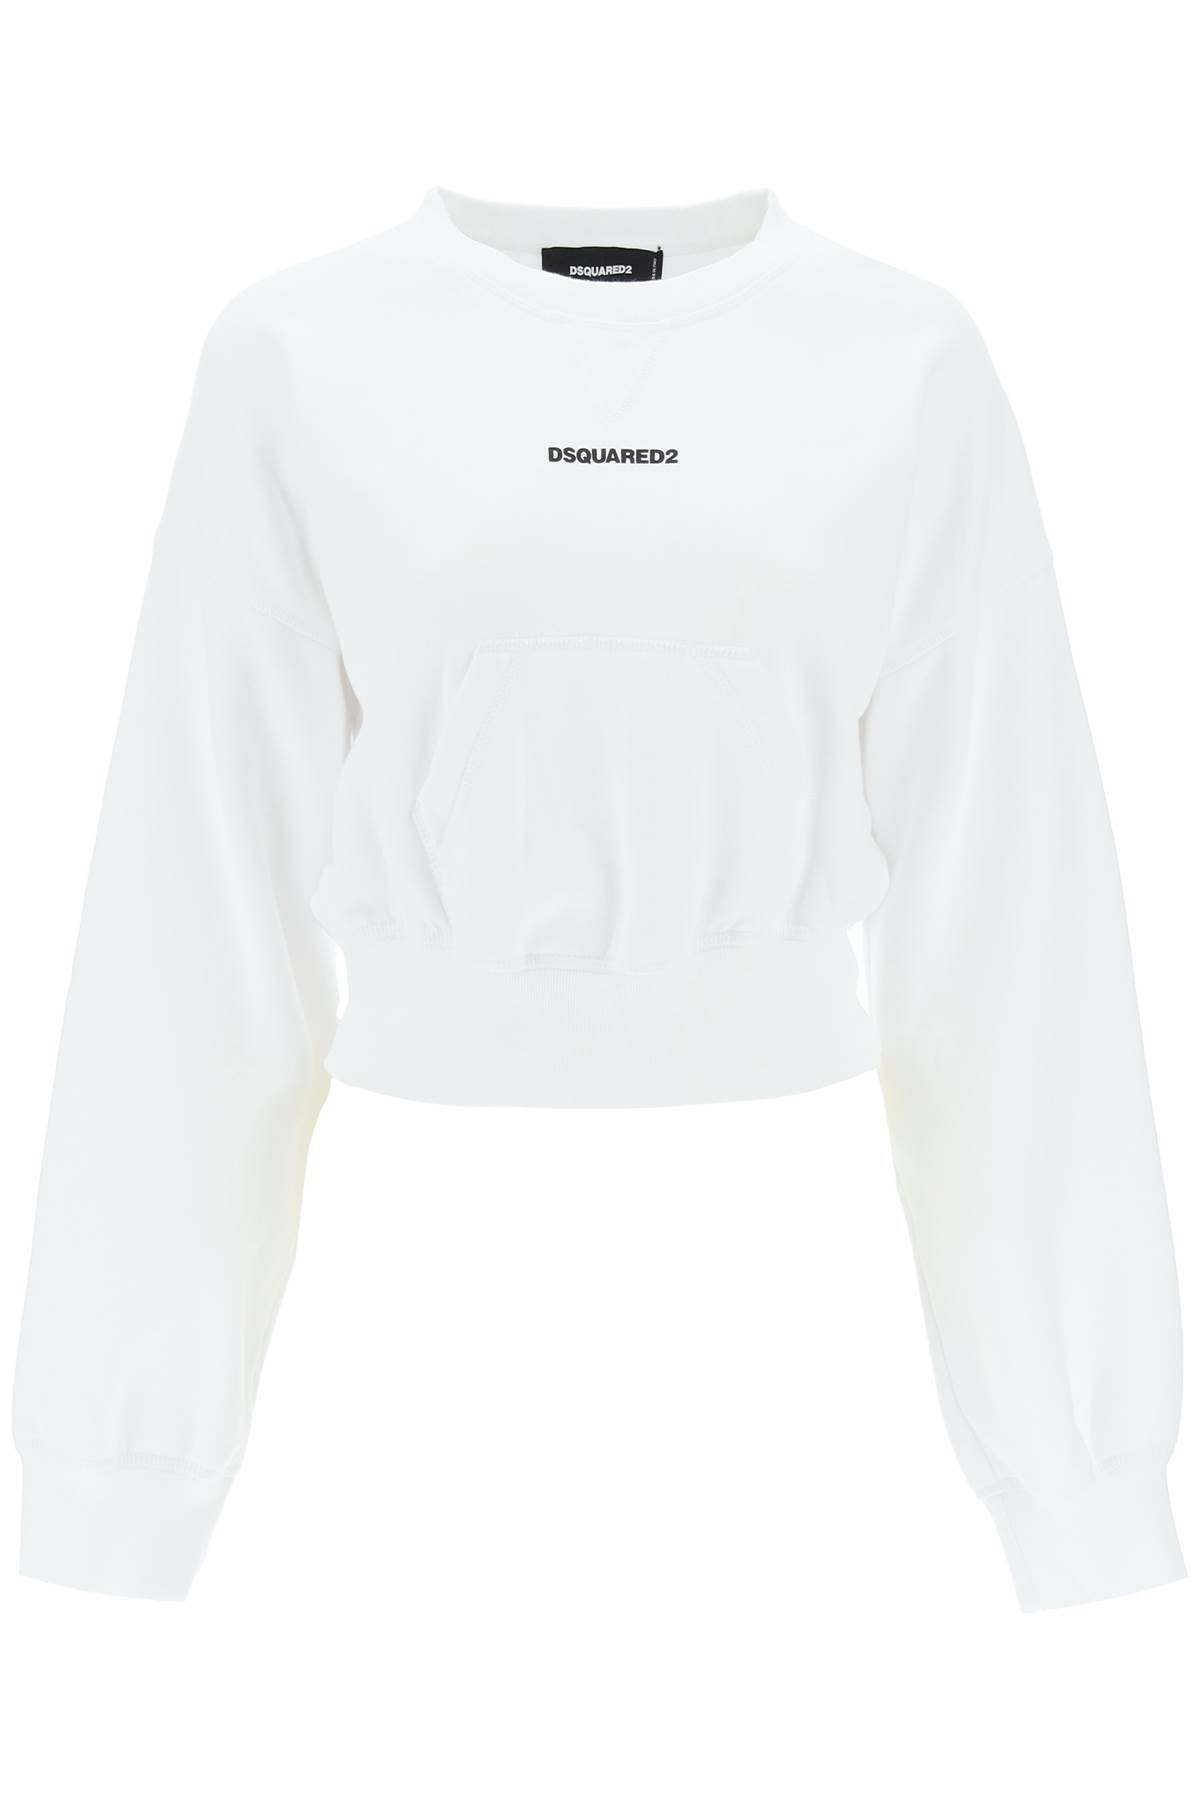 Dsquared2 cropped sweatshirt with logo-0